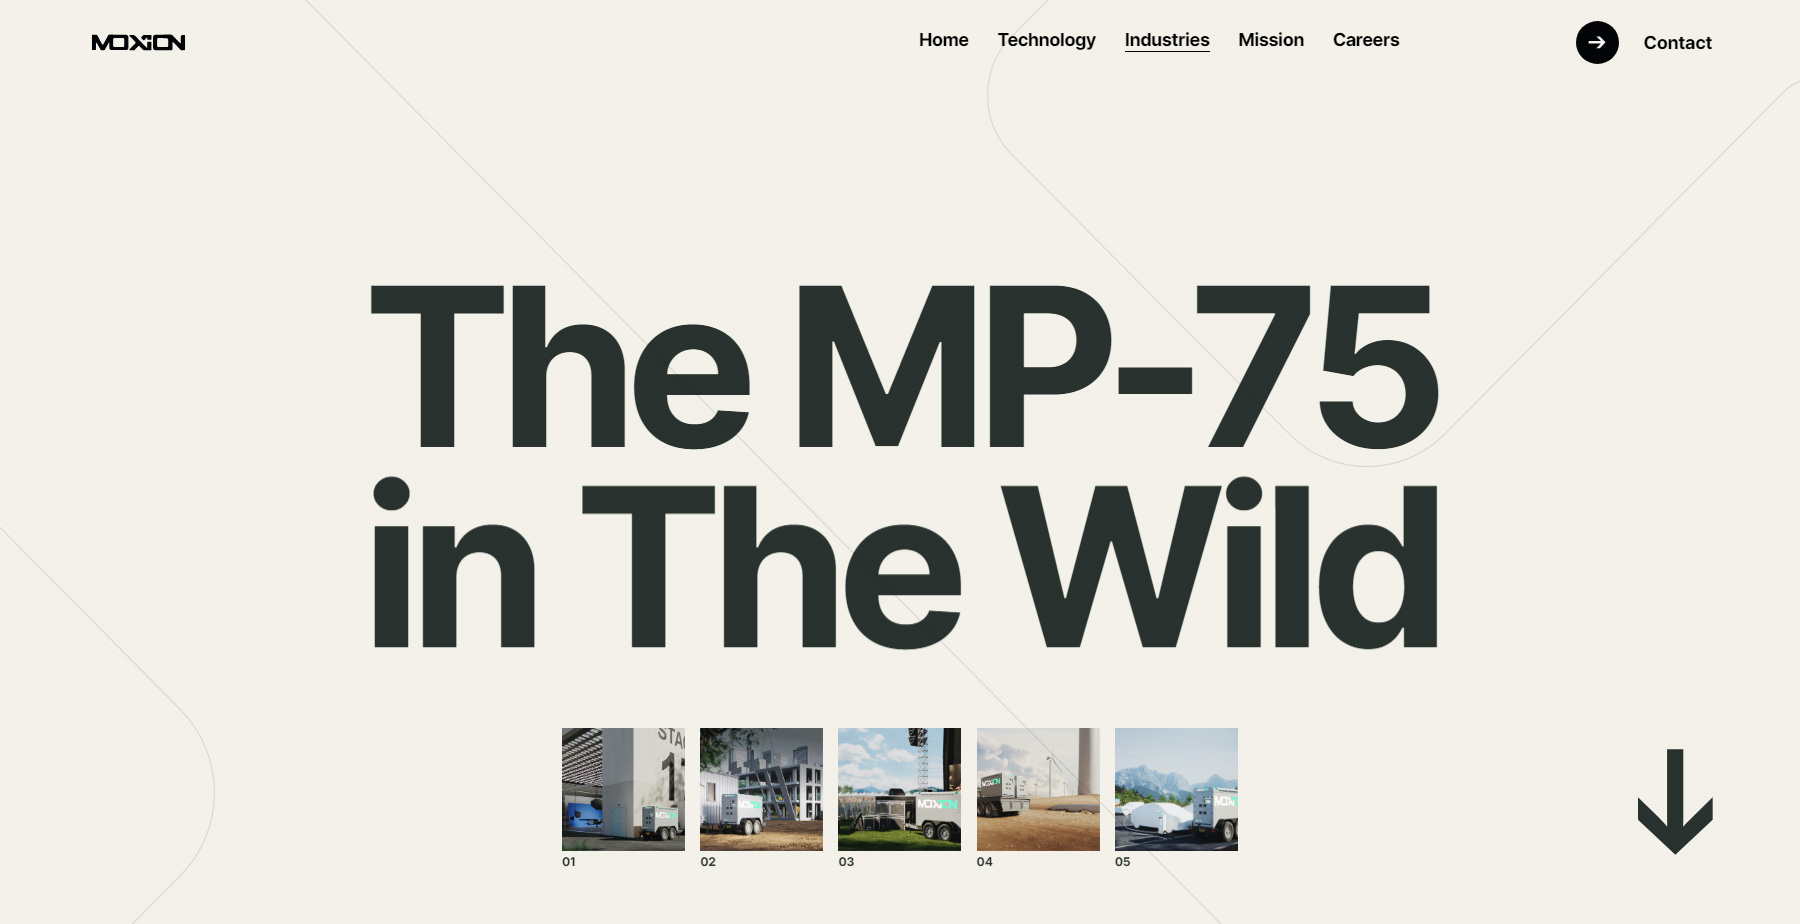 Moxion Power - Website of the Day